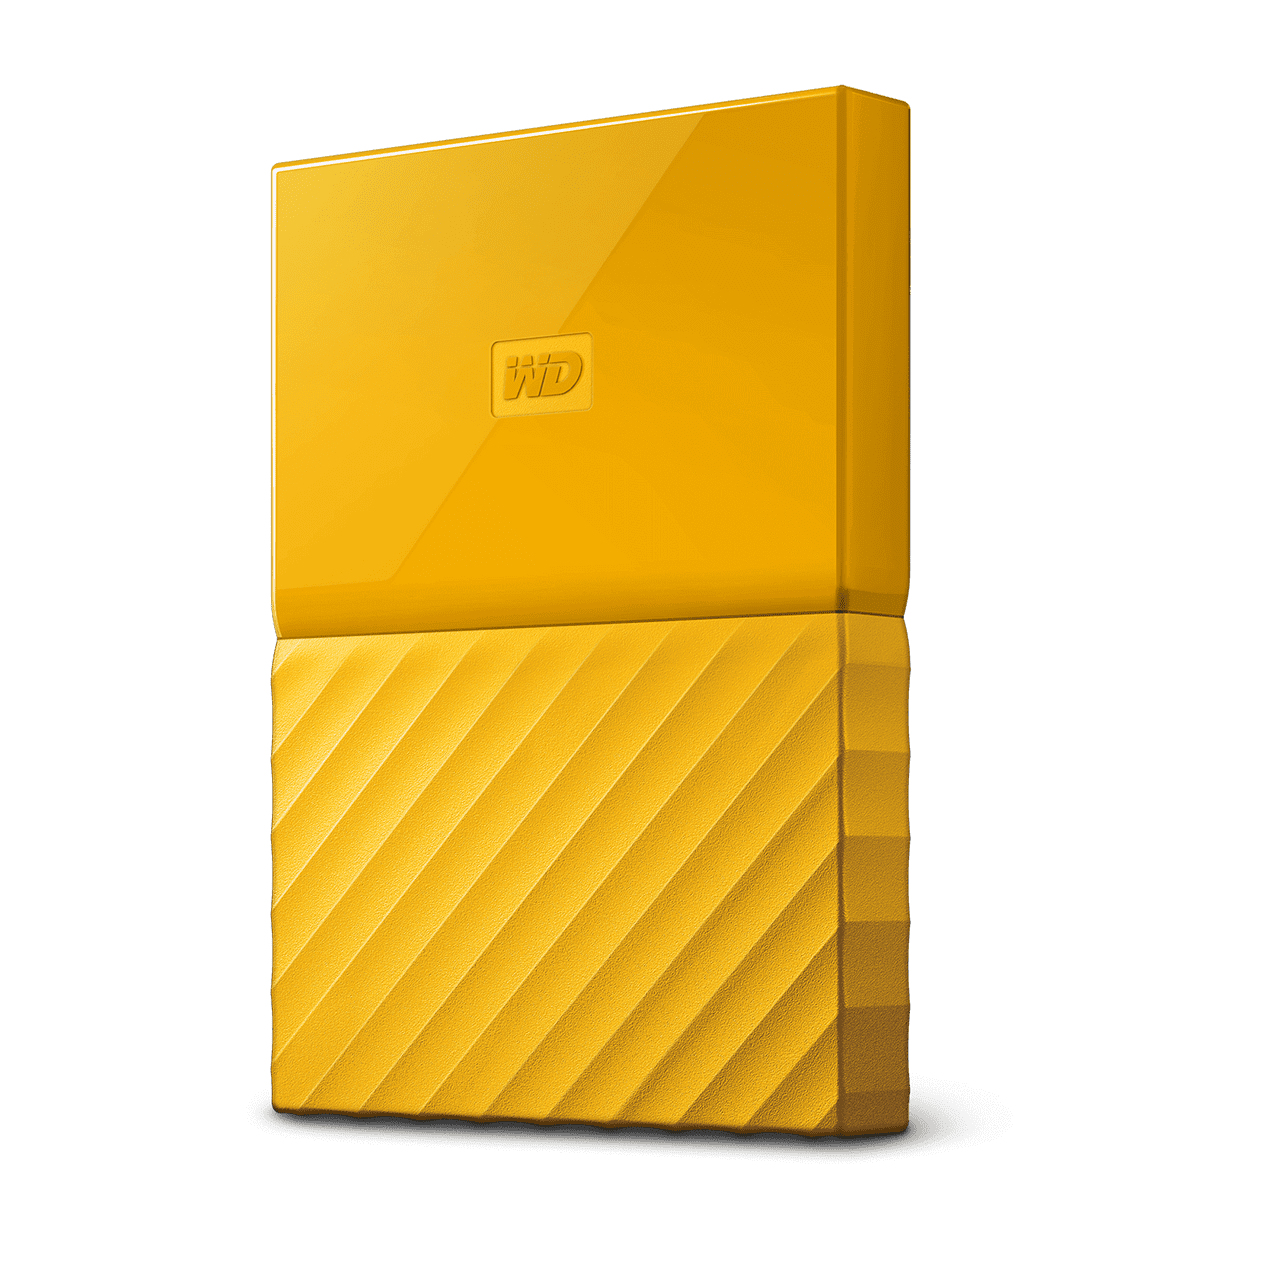 WD My Passport 4TB portable HDD external USB3.0 2,5Inch Yellow Retail Project MSH (P)